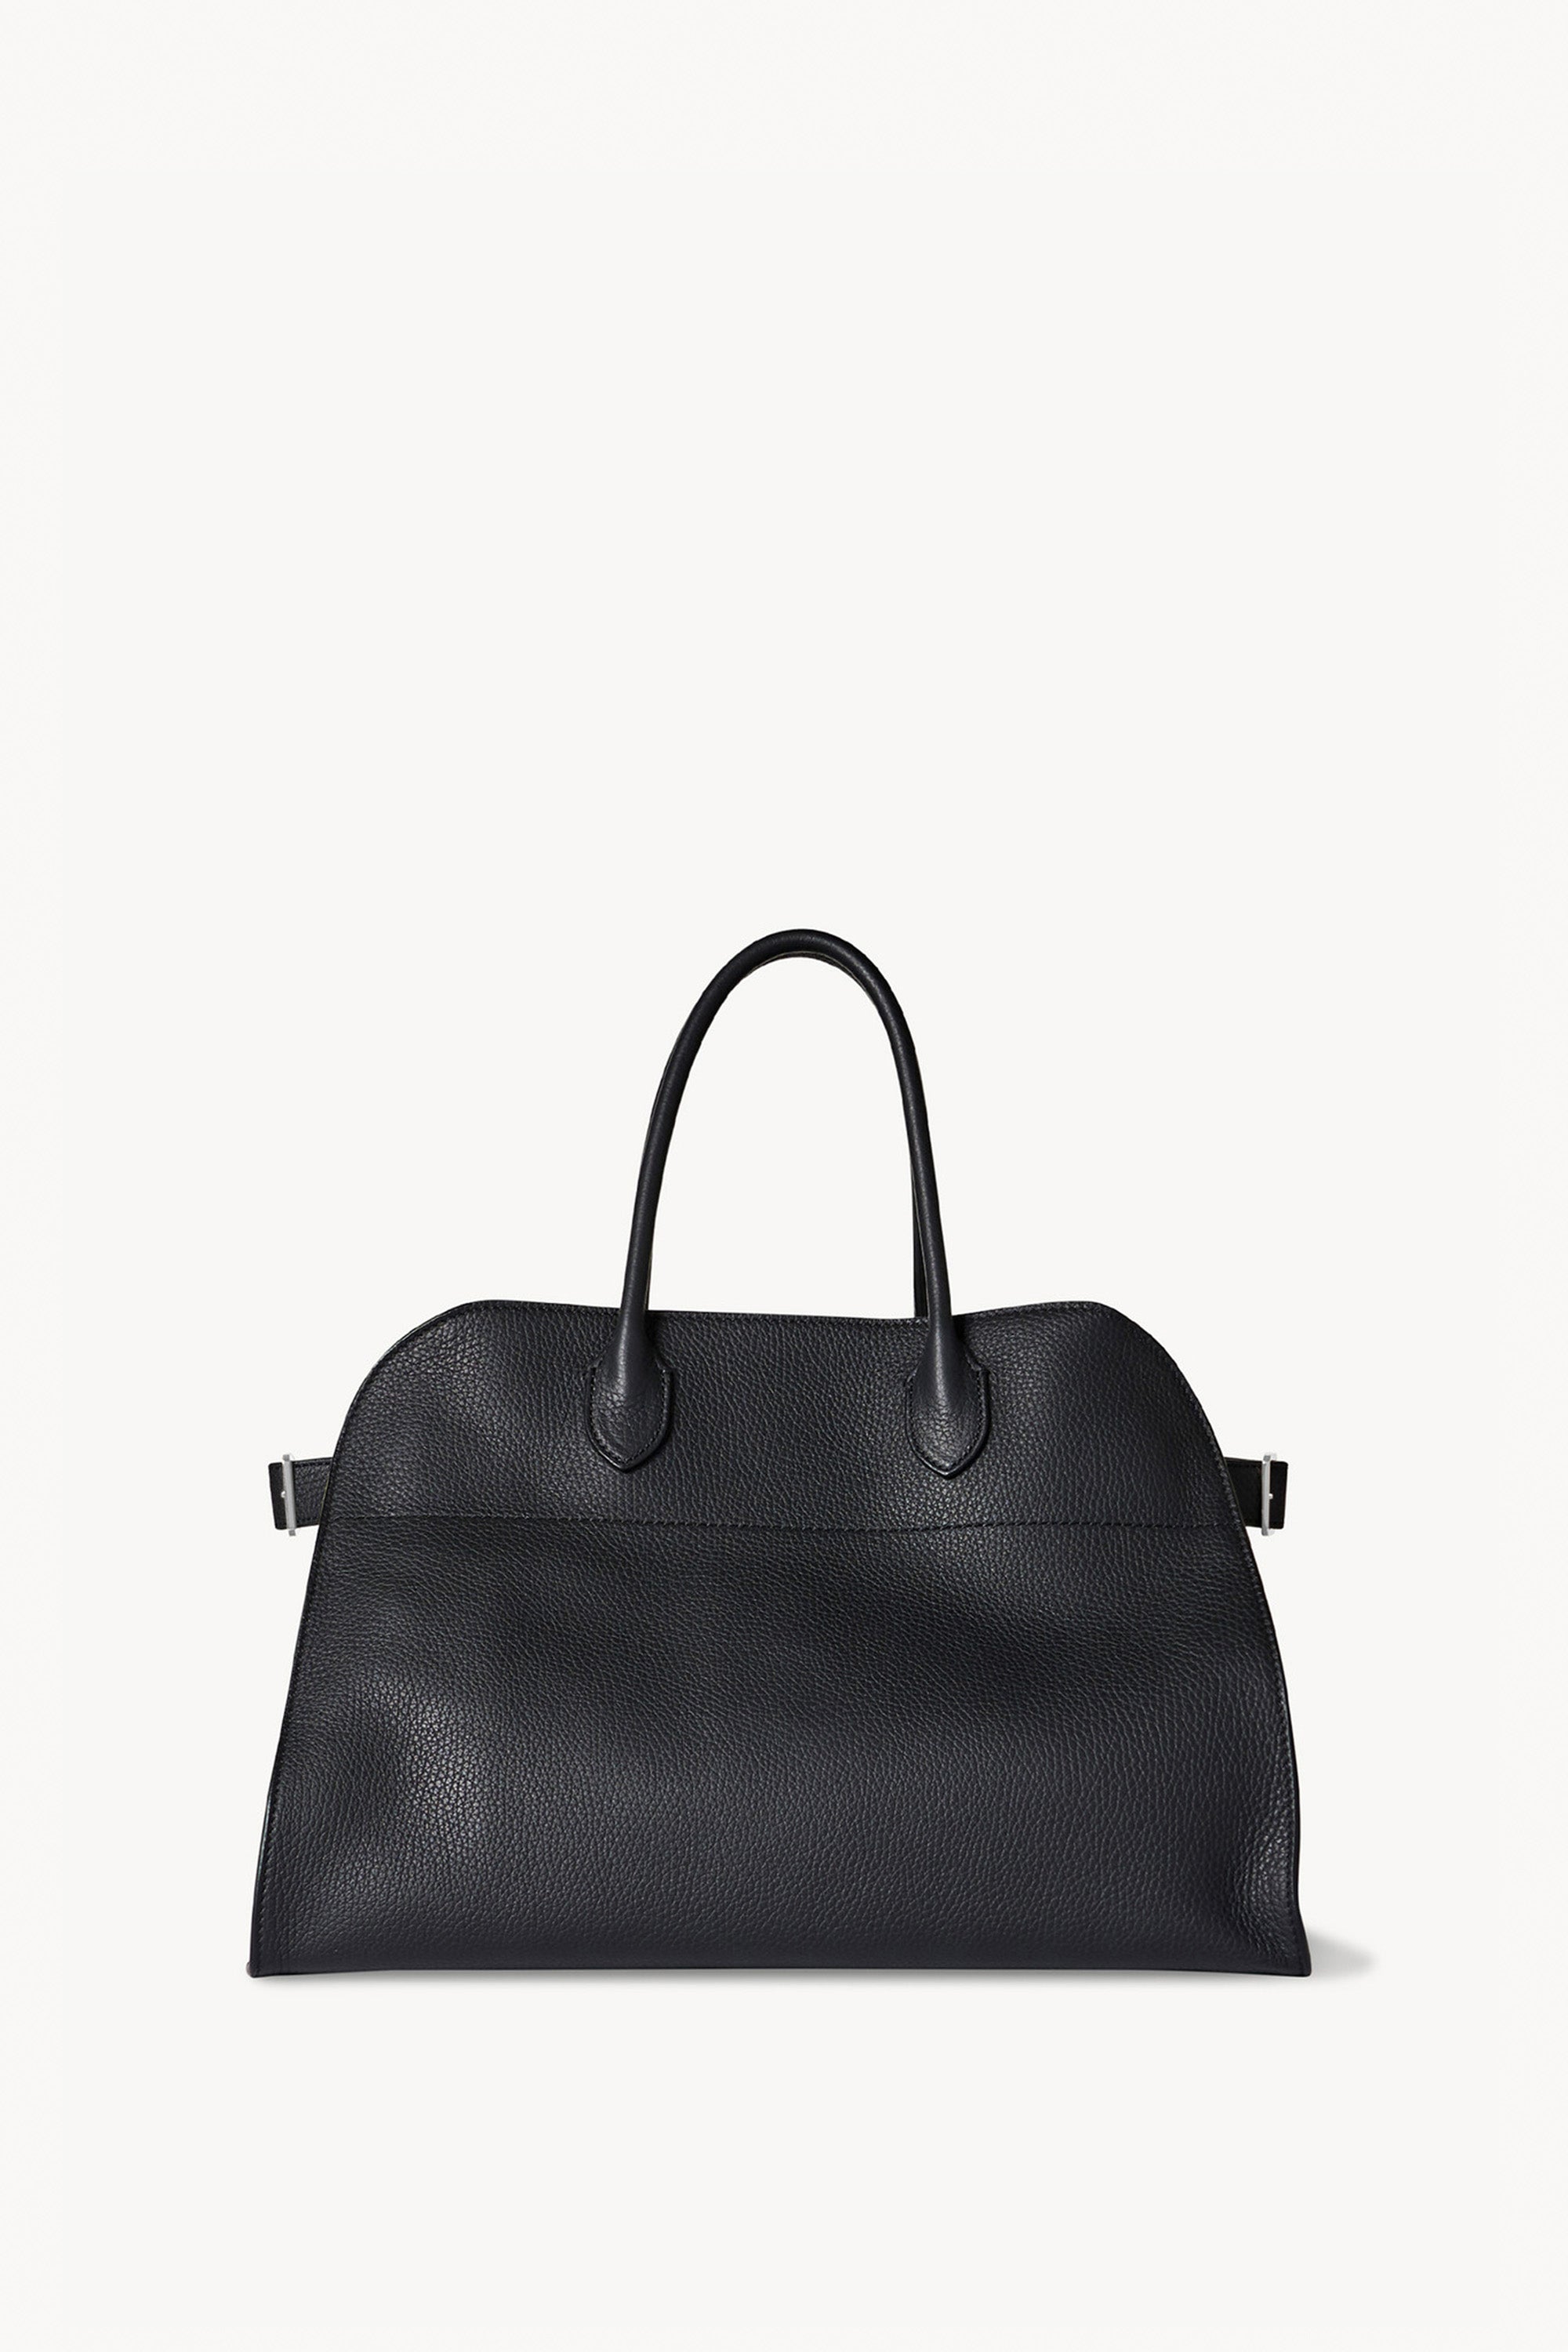 the row Margaux 15 Bag in